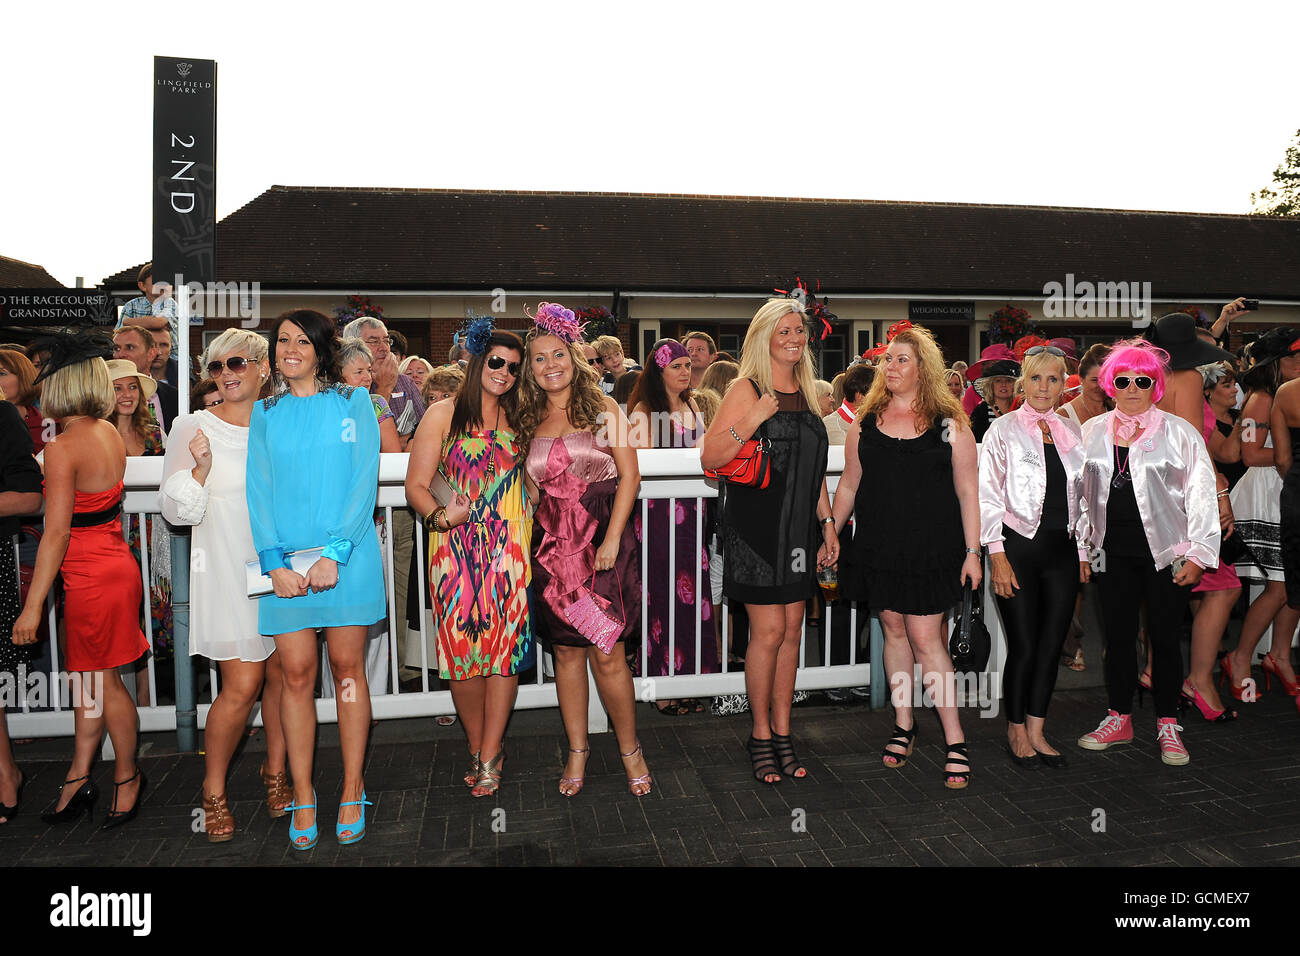 Horse Racing - Vines of Gatwick and Redhill Ladies' Evening - featuring Girls B Loud - Lingfield Park. Ladies gather in the winners enclosure for the judging of the 'Best Dressed Lady' competition. Stock Photo